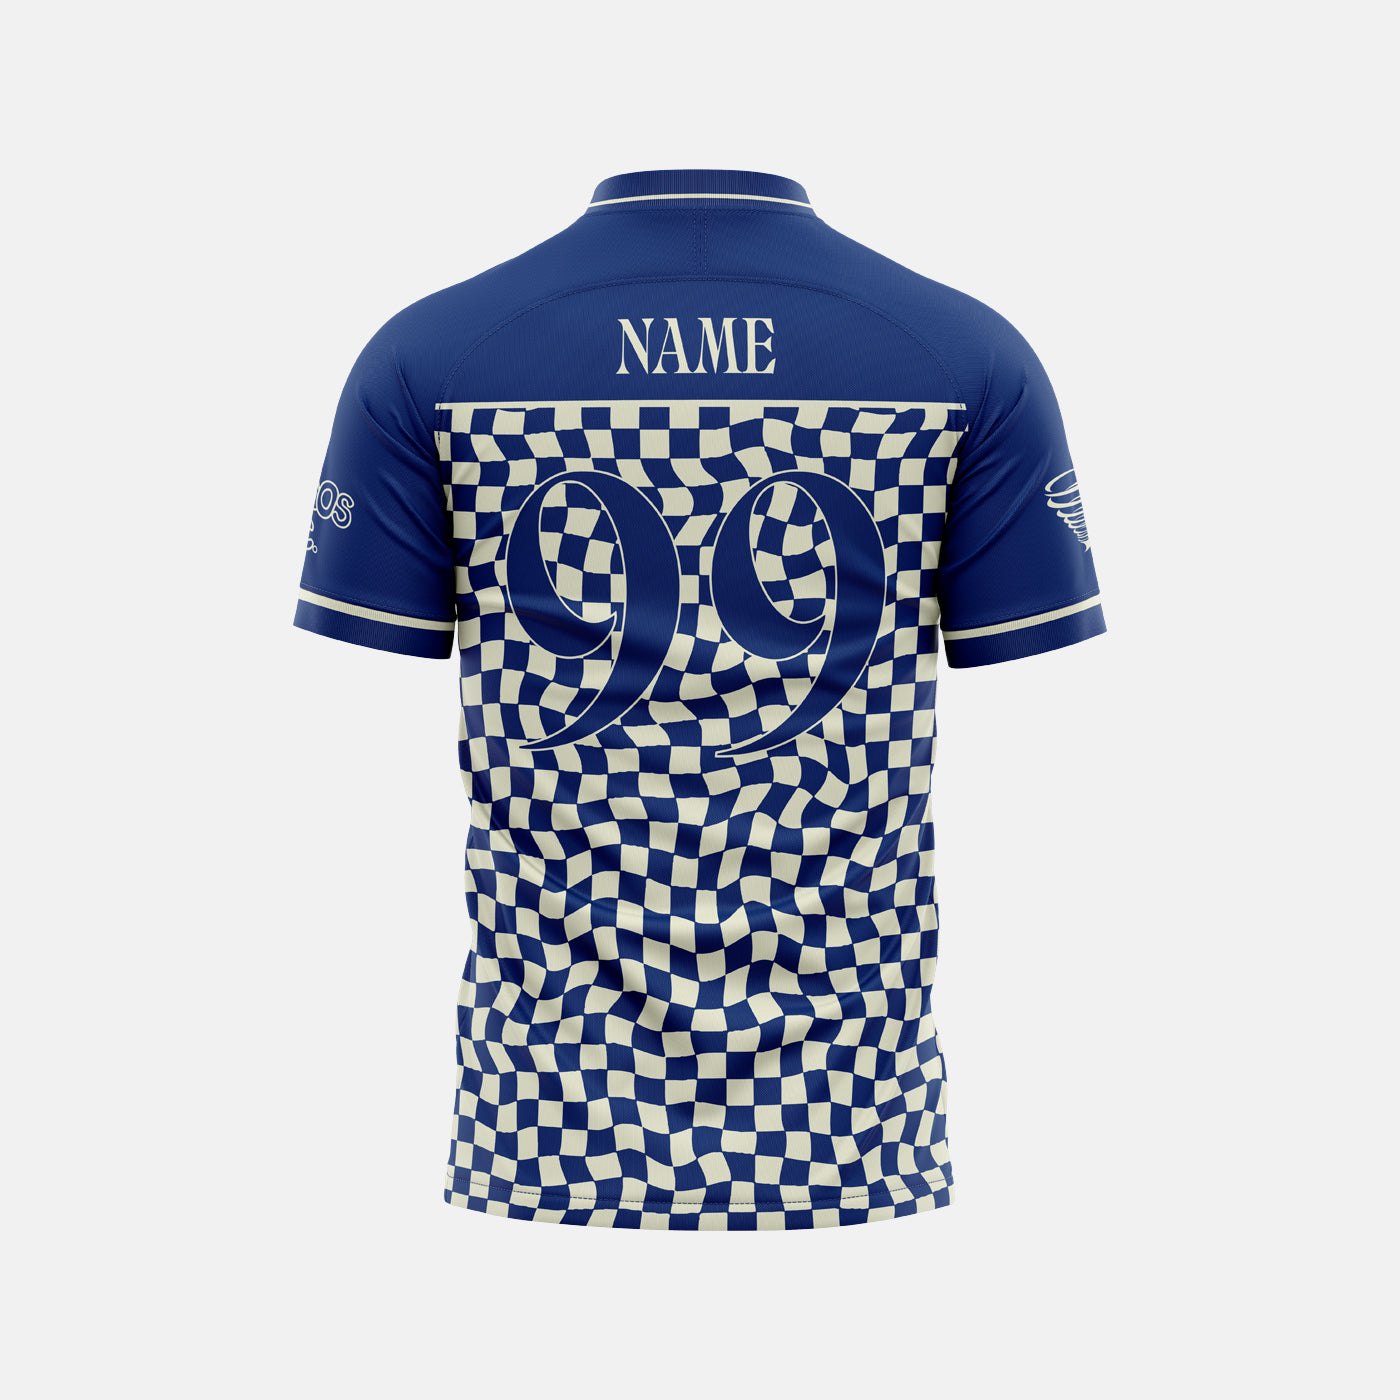 Chaos FC Home Jersey